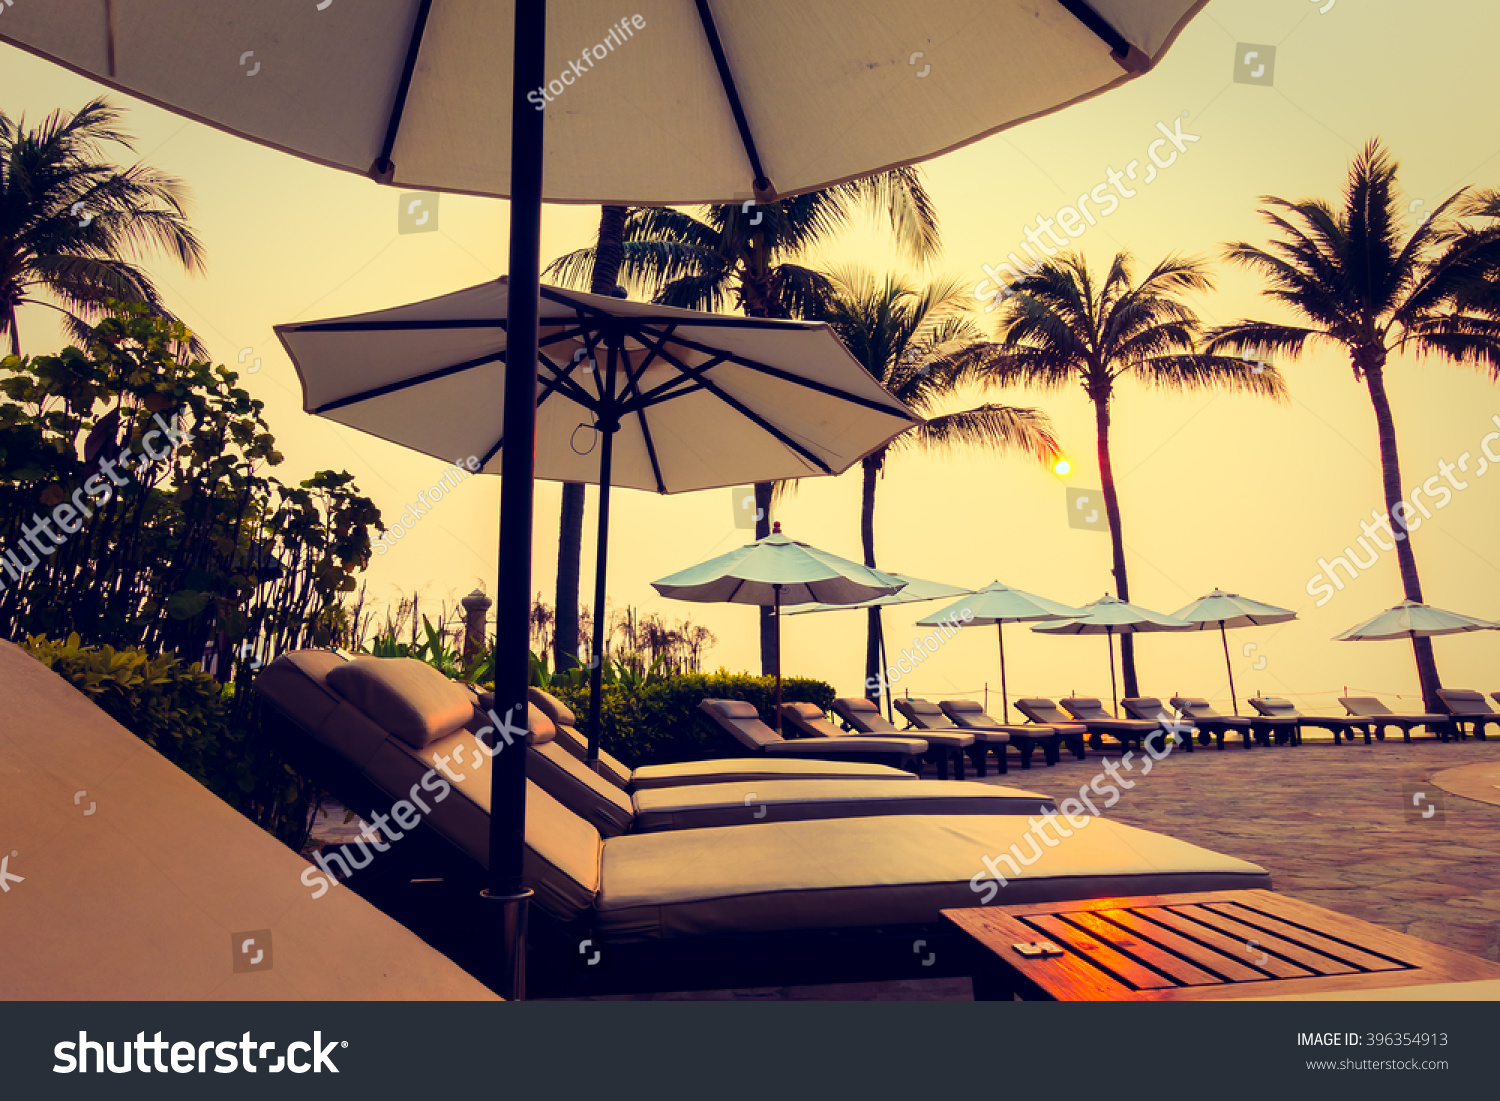 Beautiful Silhouette luxury umbrella and chair around swimming pool in hotel pool resort with coconut palm tree at sunrise times - Vintage Filter and Boost up color Processing #396354913